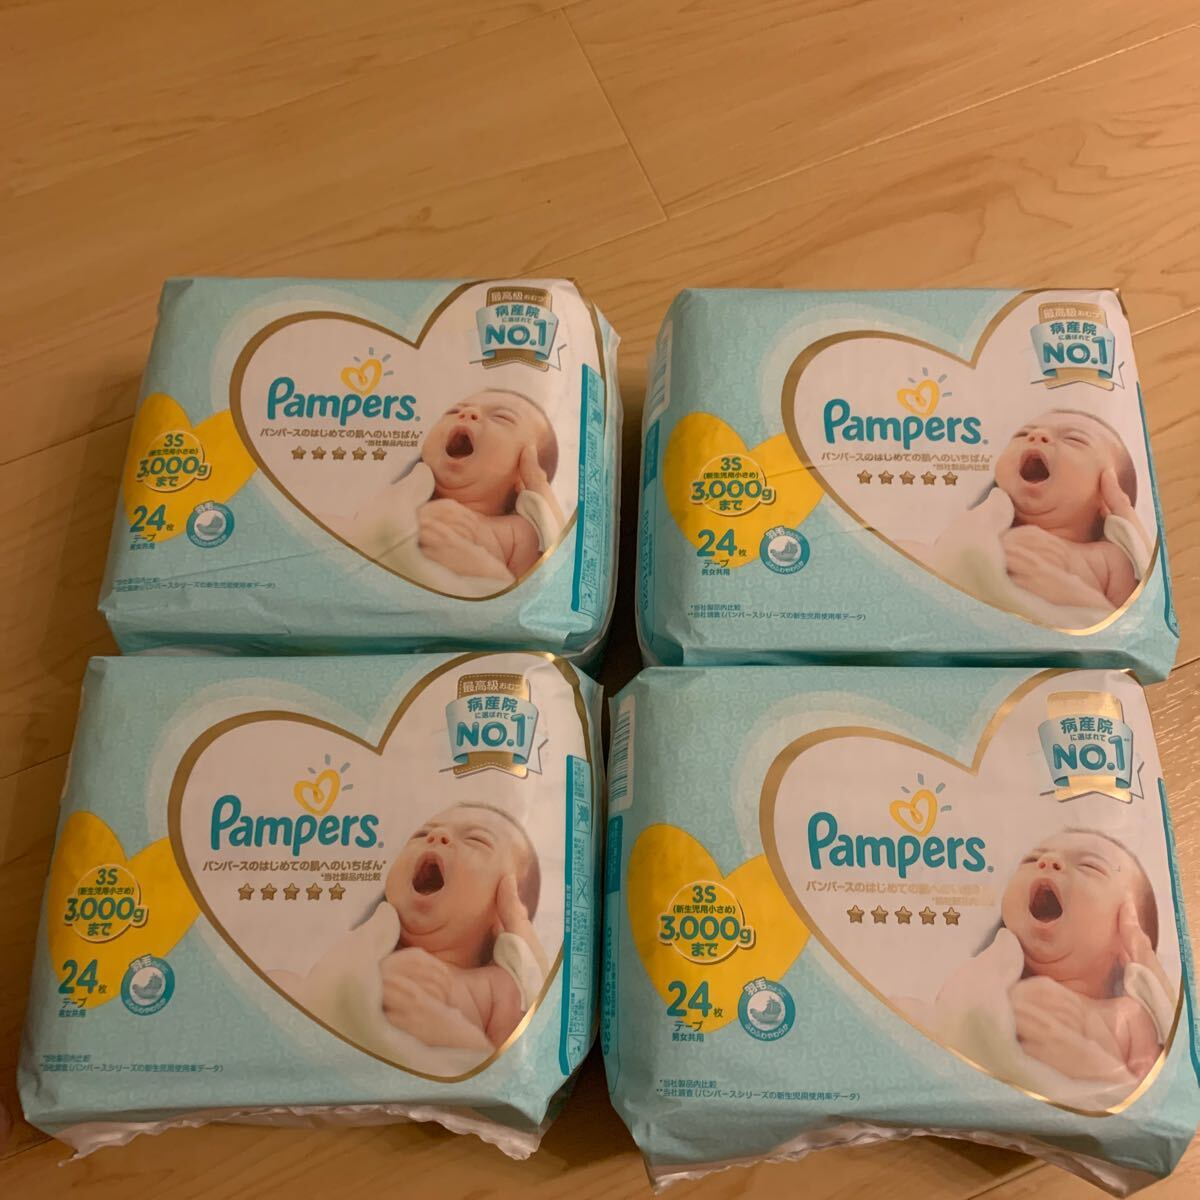  bread perth tape disposable diapers newborn baby for start .. . to ....24 sheets .4.